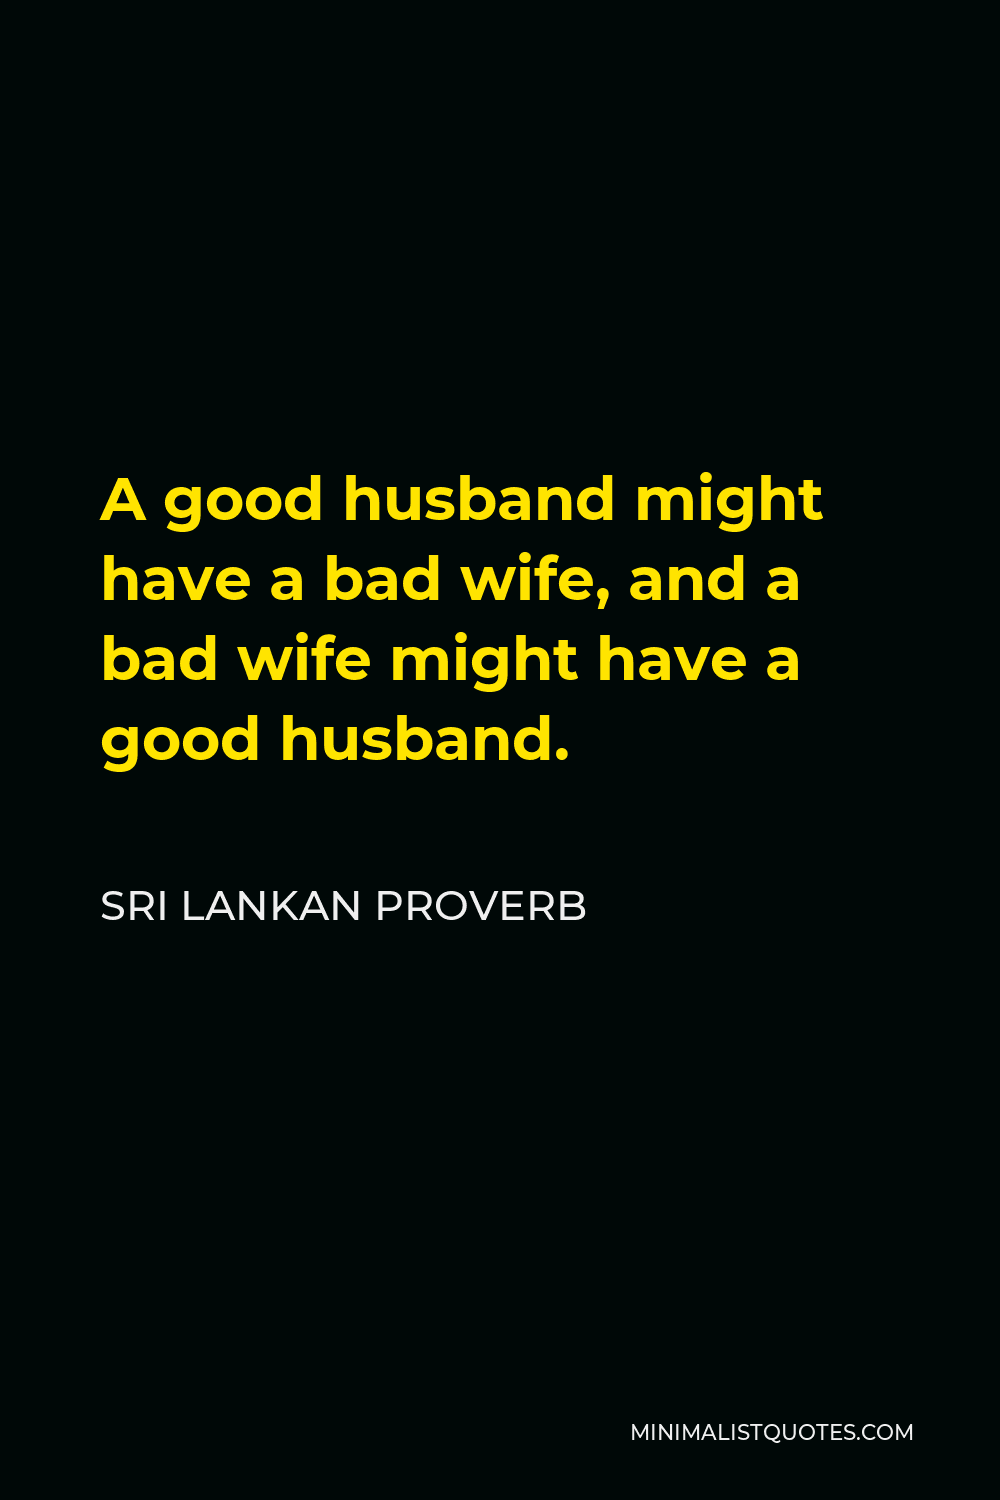 Sri Lankan Proverb Quote - A good husband might have a bad wife, and a bad wife might have a good husband.